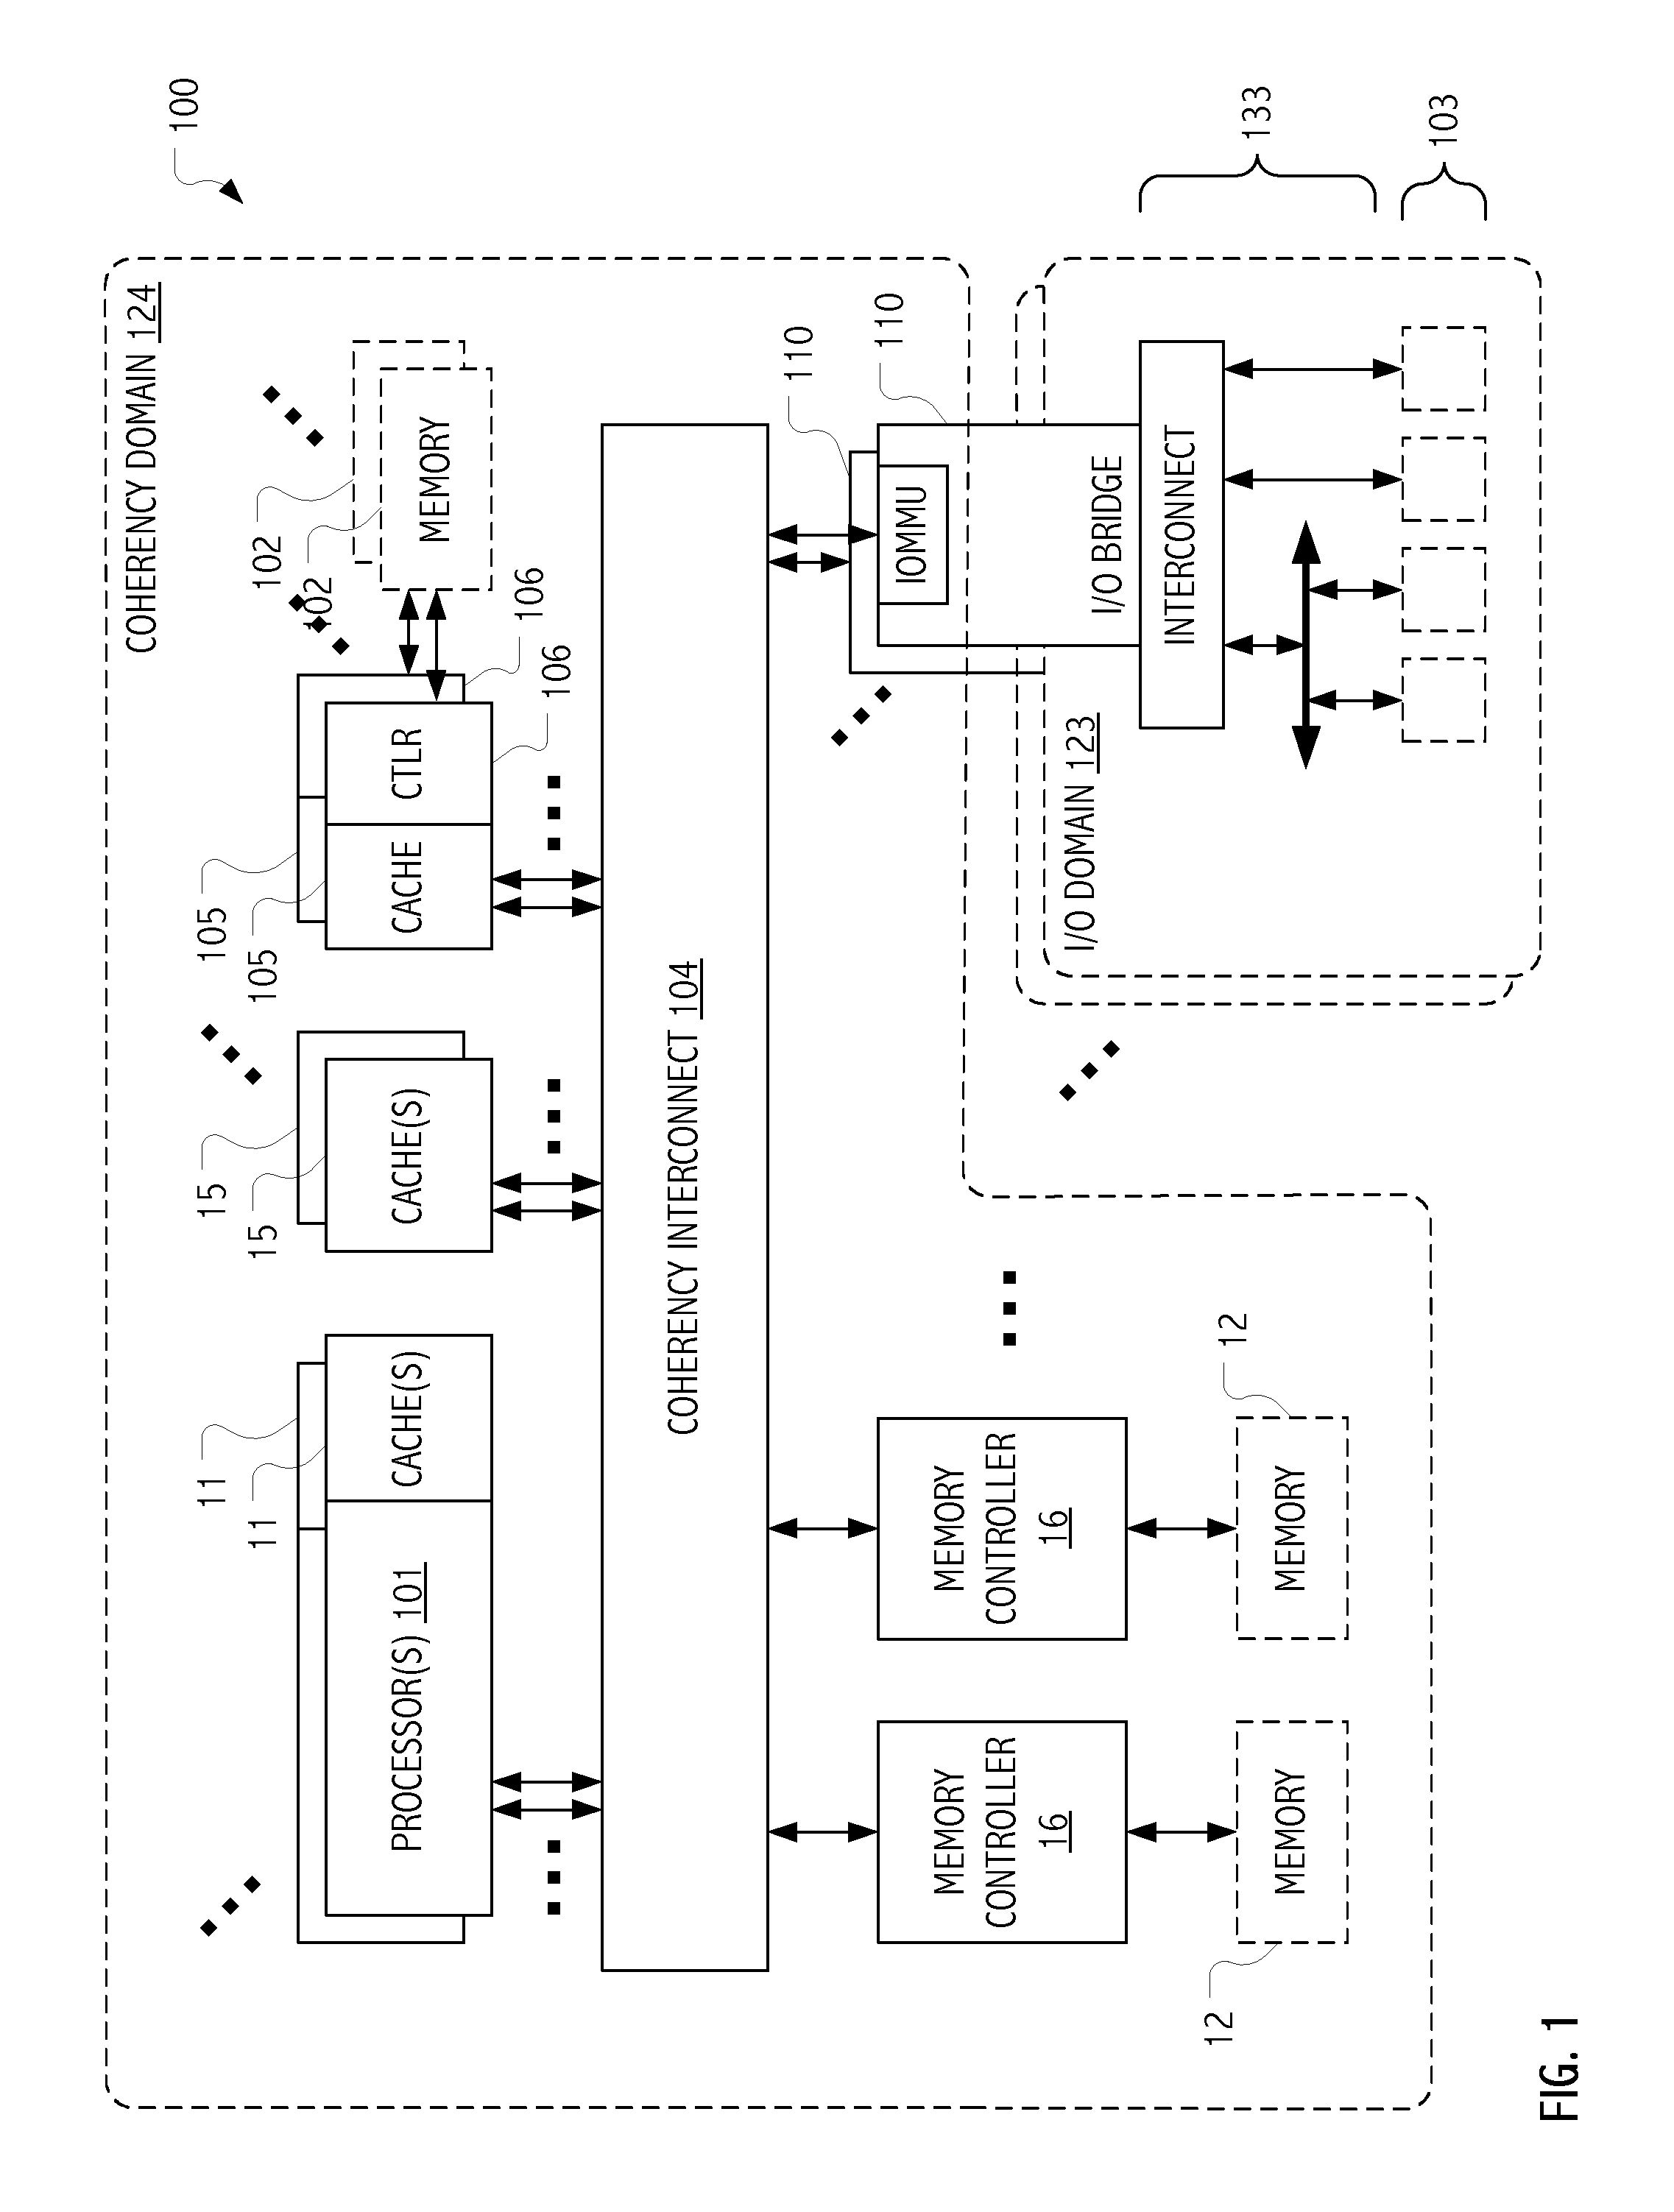 Flow Control Mechanisms for Avoidance of Retries and/or Deadlocks in an Interconnect